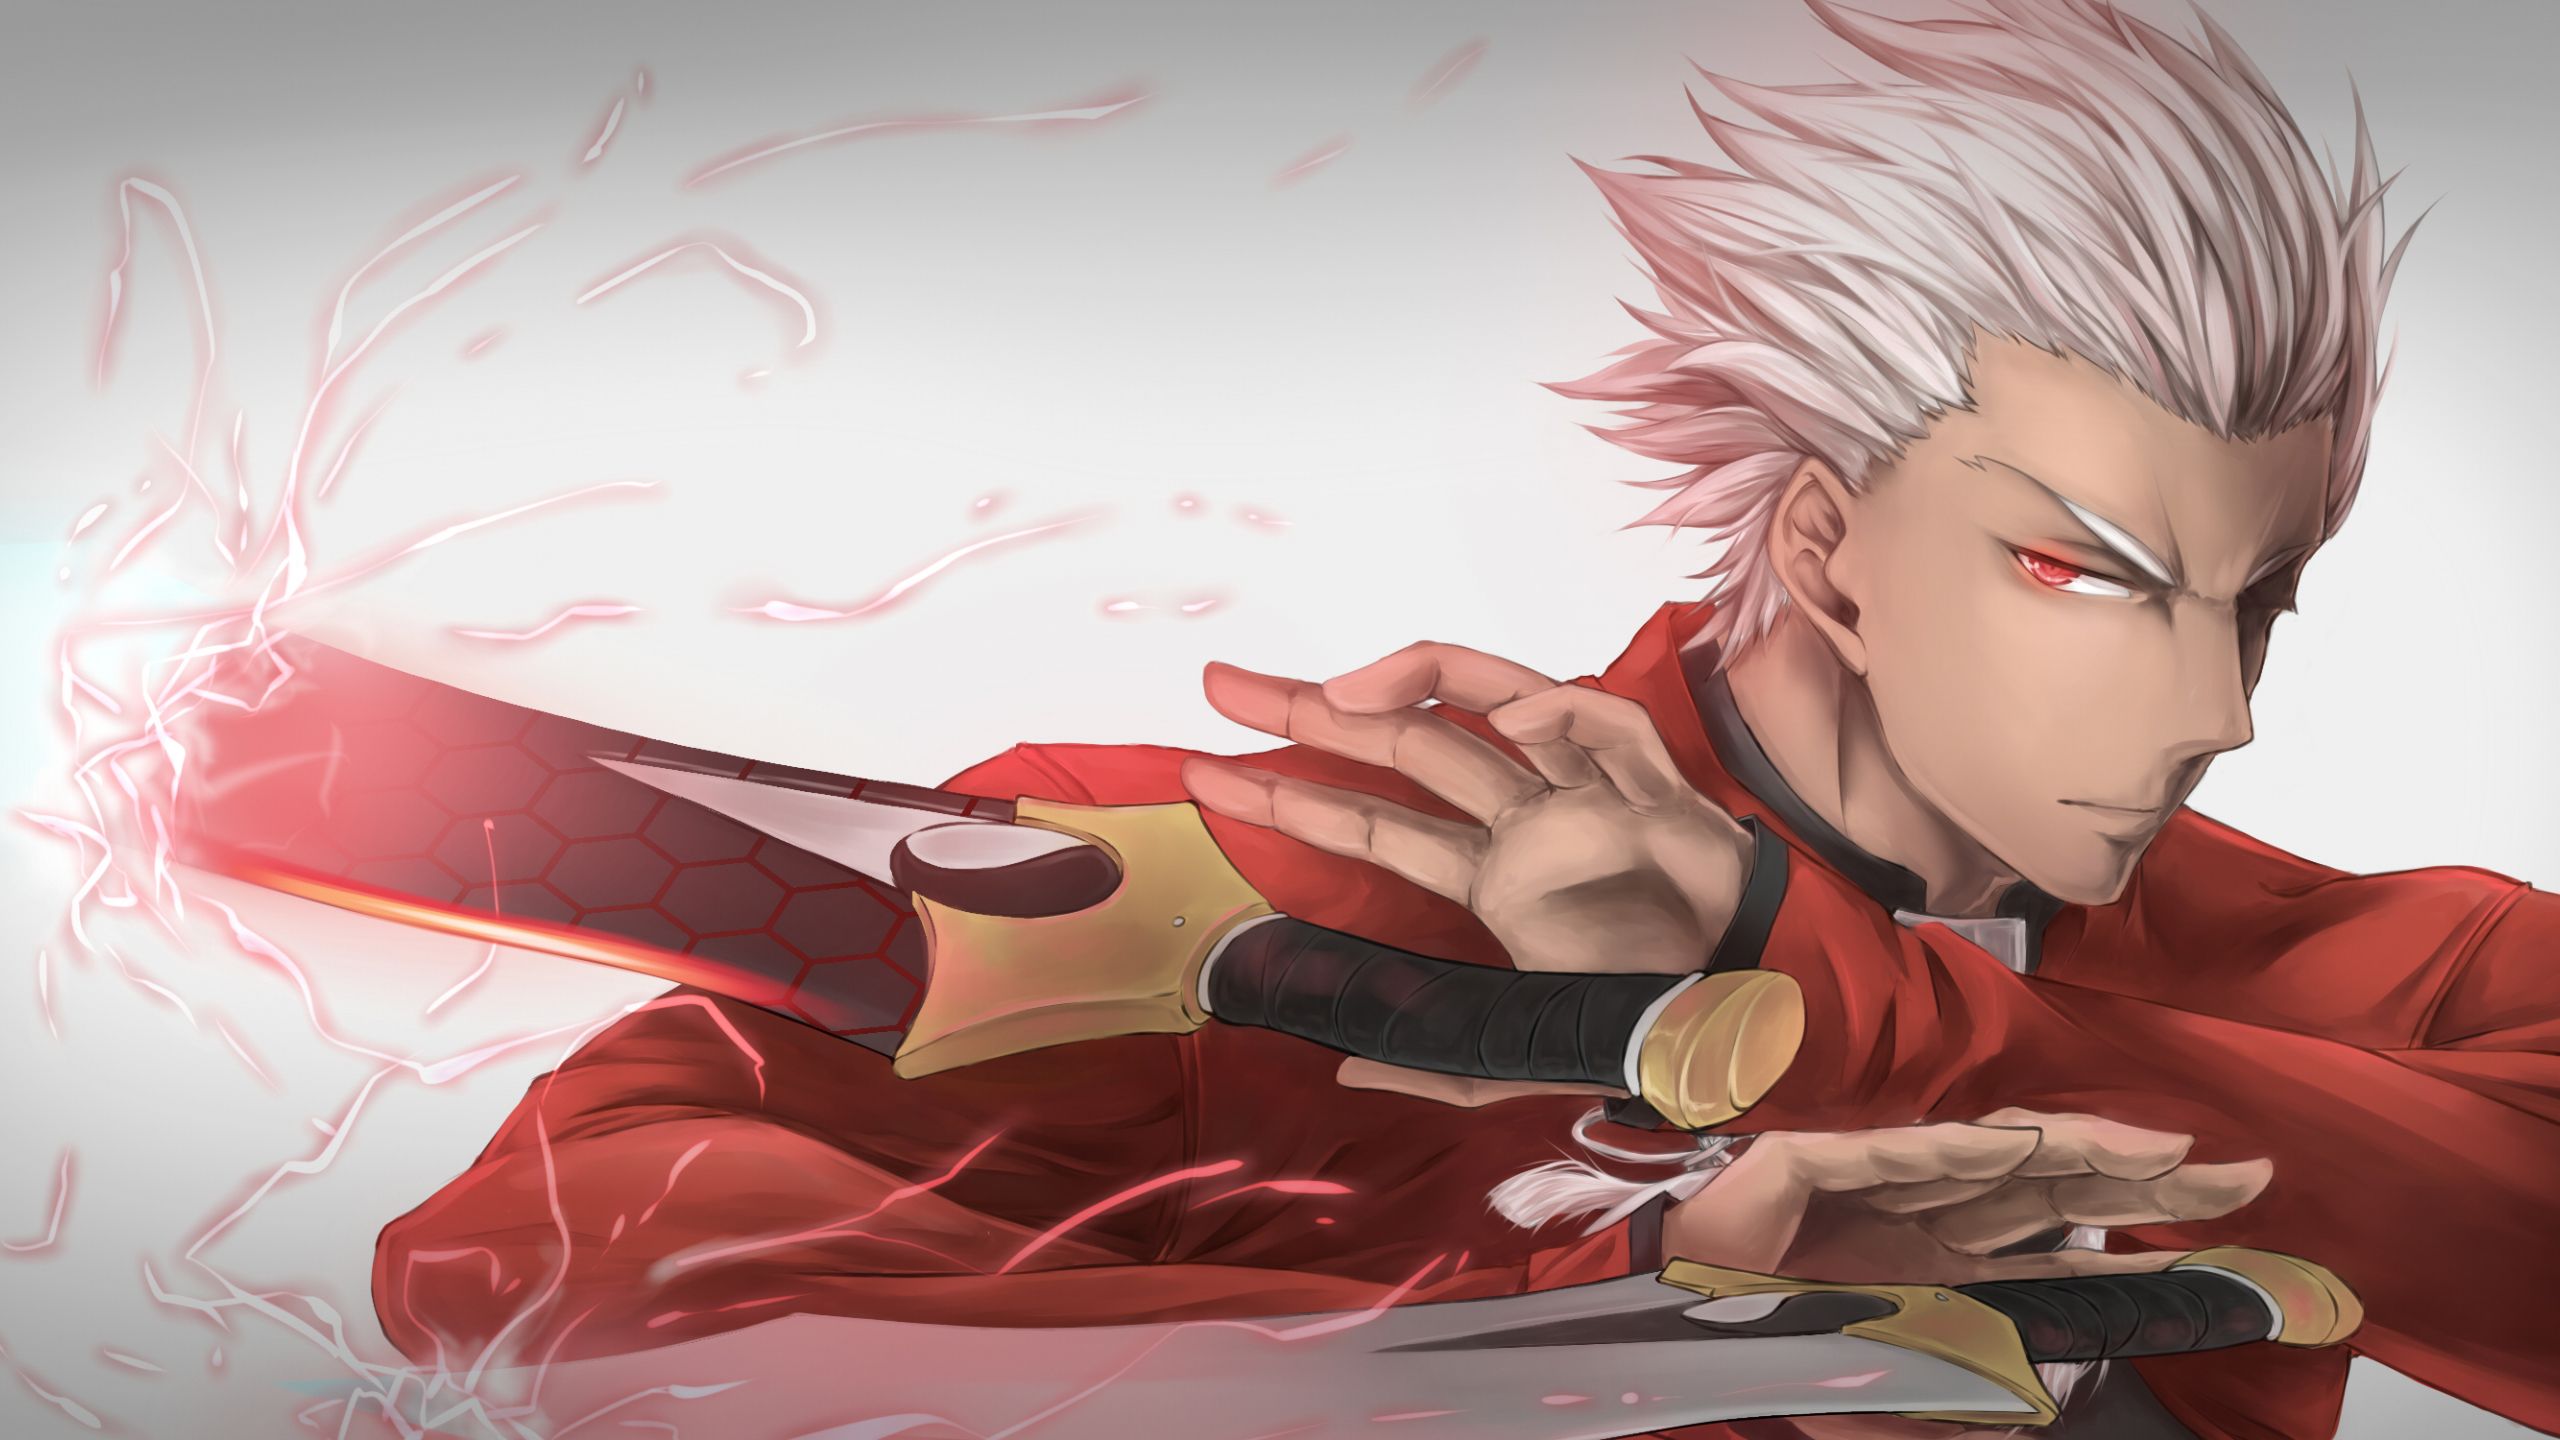 Desktop Wallpaper Archer, Fate Stay Night, Type Moon, HD Image, Picture, Background, Ohgni3